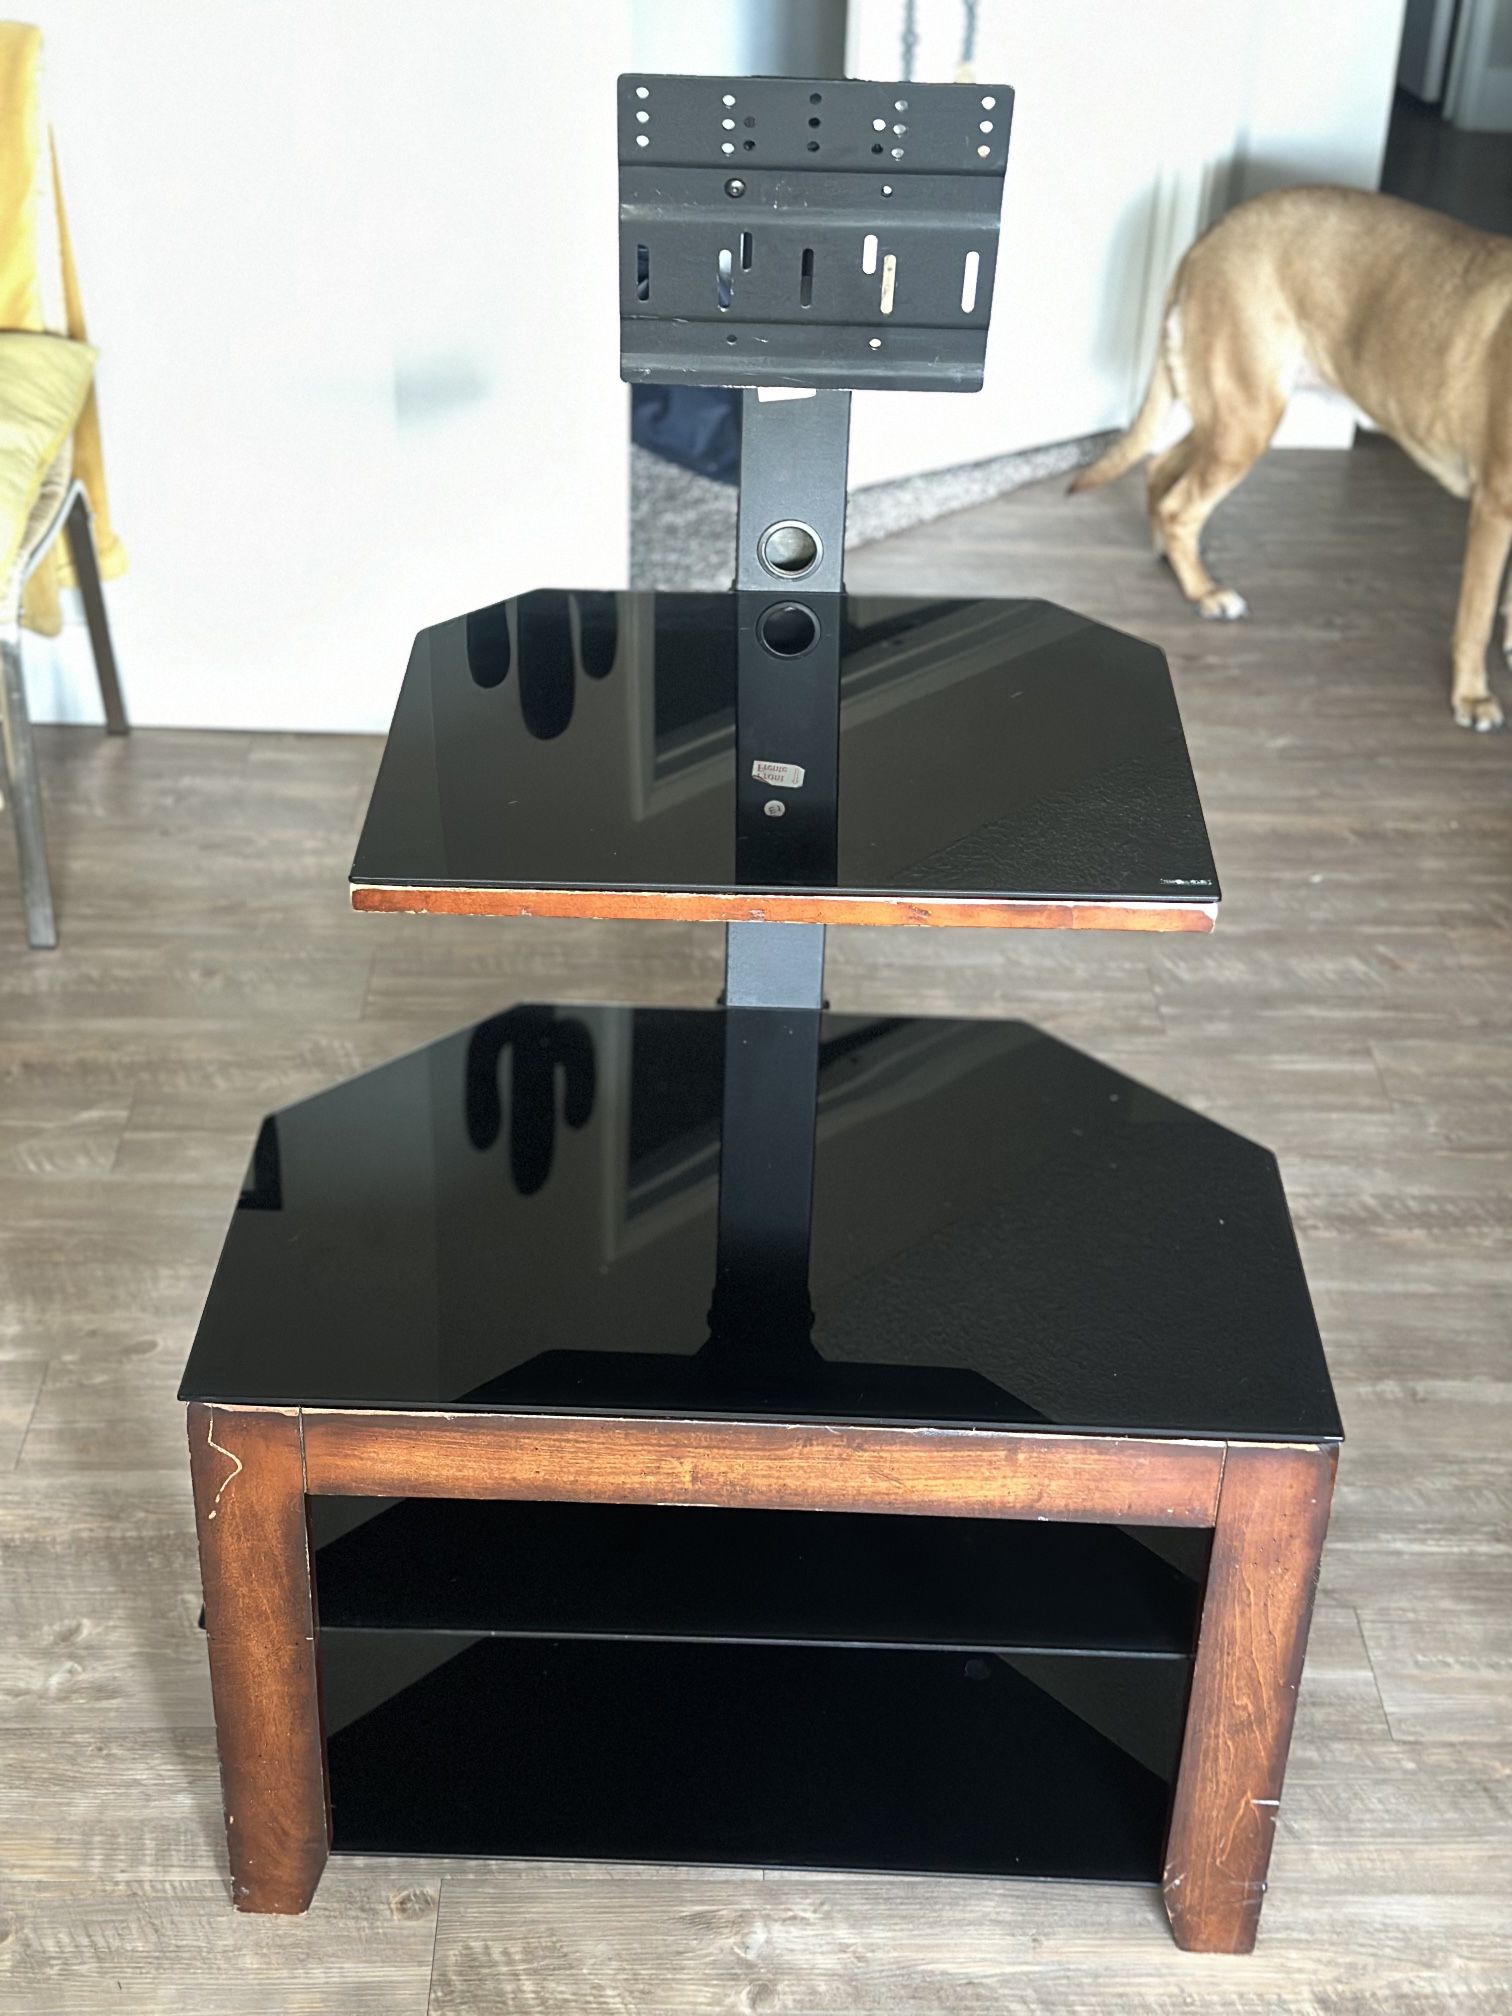 Tempered Glass TV Stand